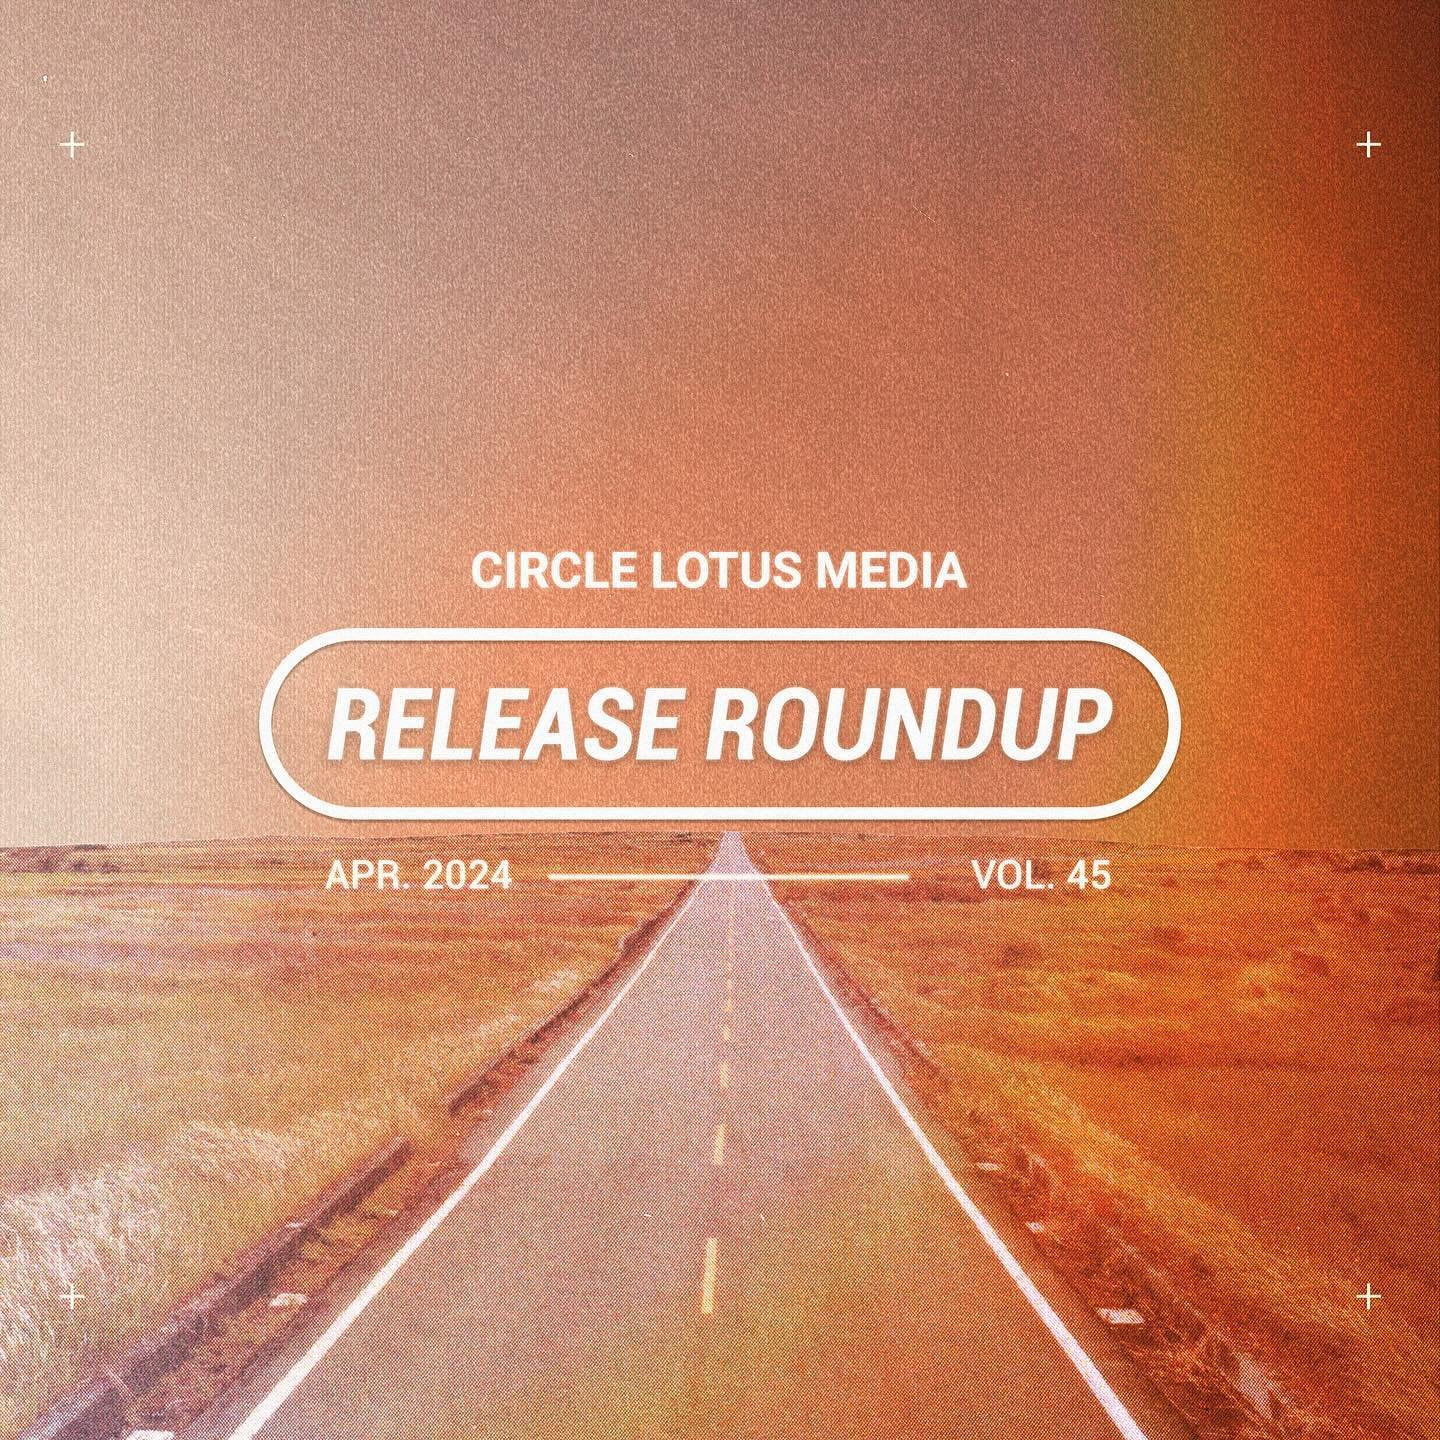 Release Roundup: April 2024 🪷

I started Release Roundup under CLM in August 2020, and have published one EVERY month since - and this edition will be my final. 

This has always been a &ldquo;passion project&rdquo; (insert your fav cliche) but trul